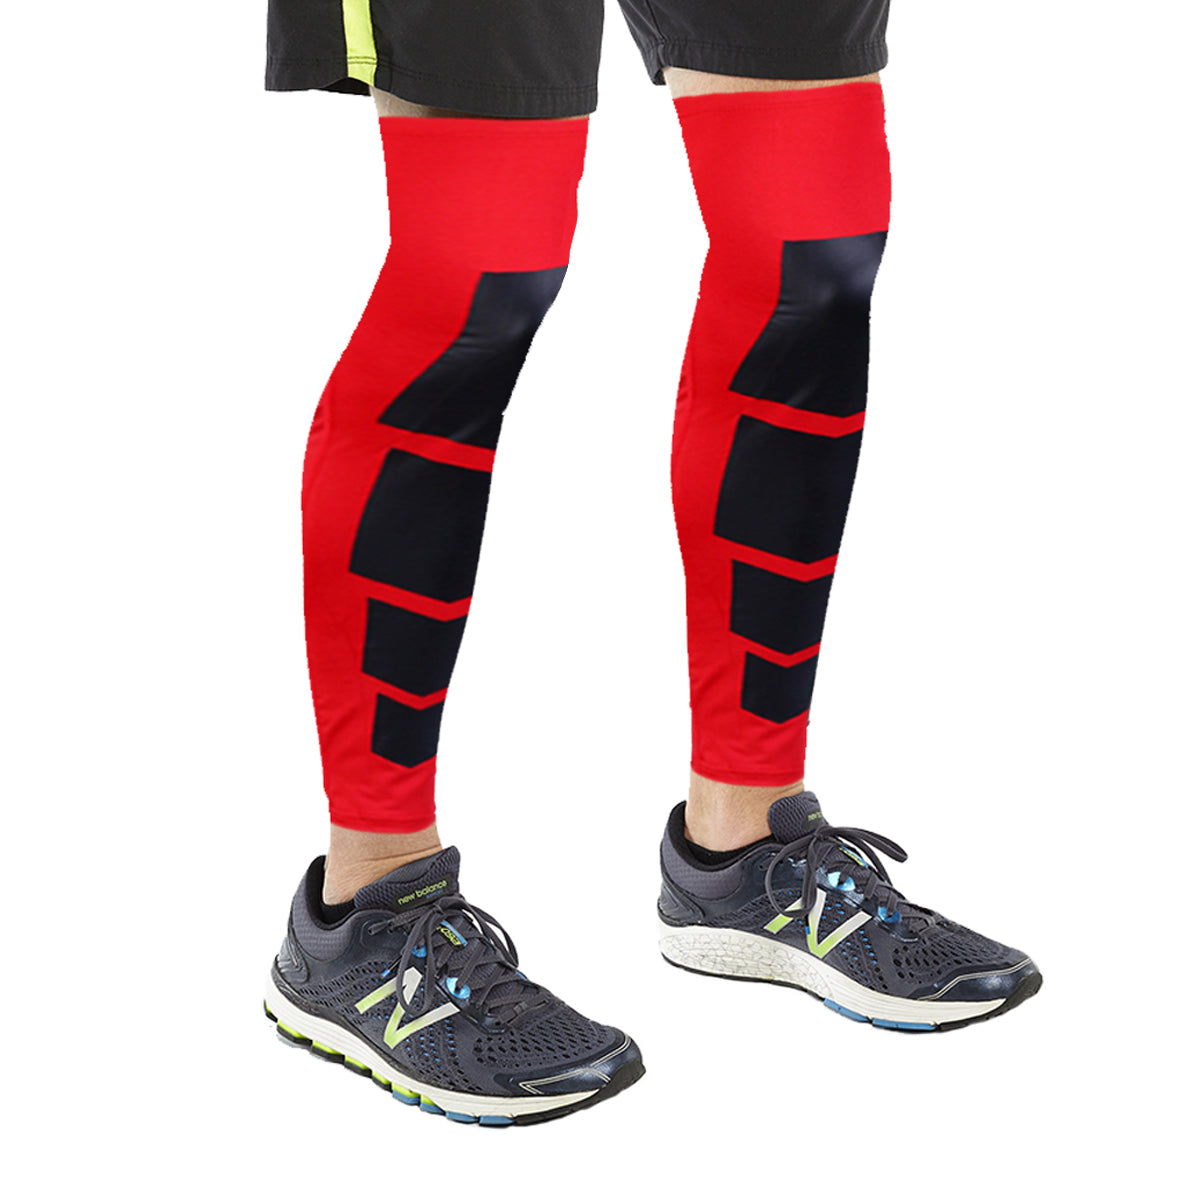 Full-Length Knee and Calf Compression Sleeves